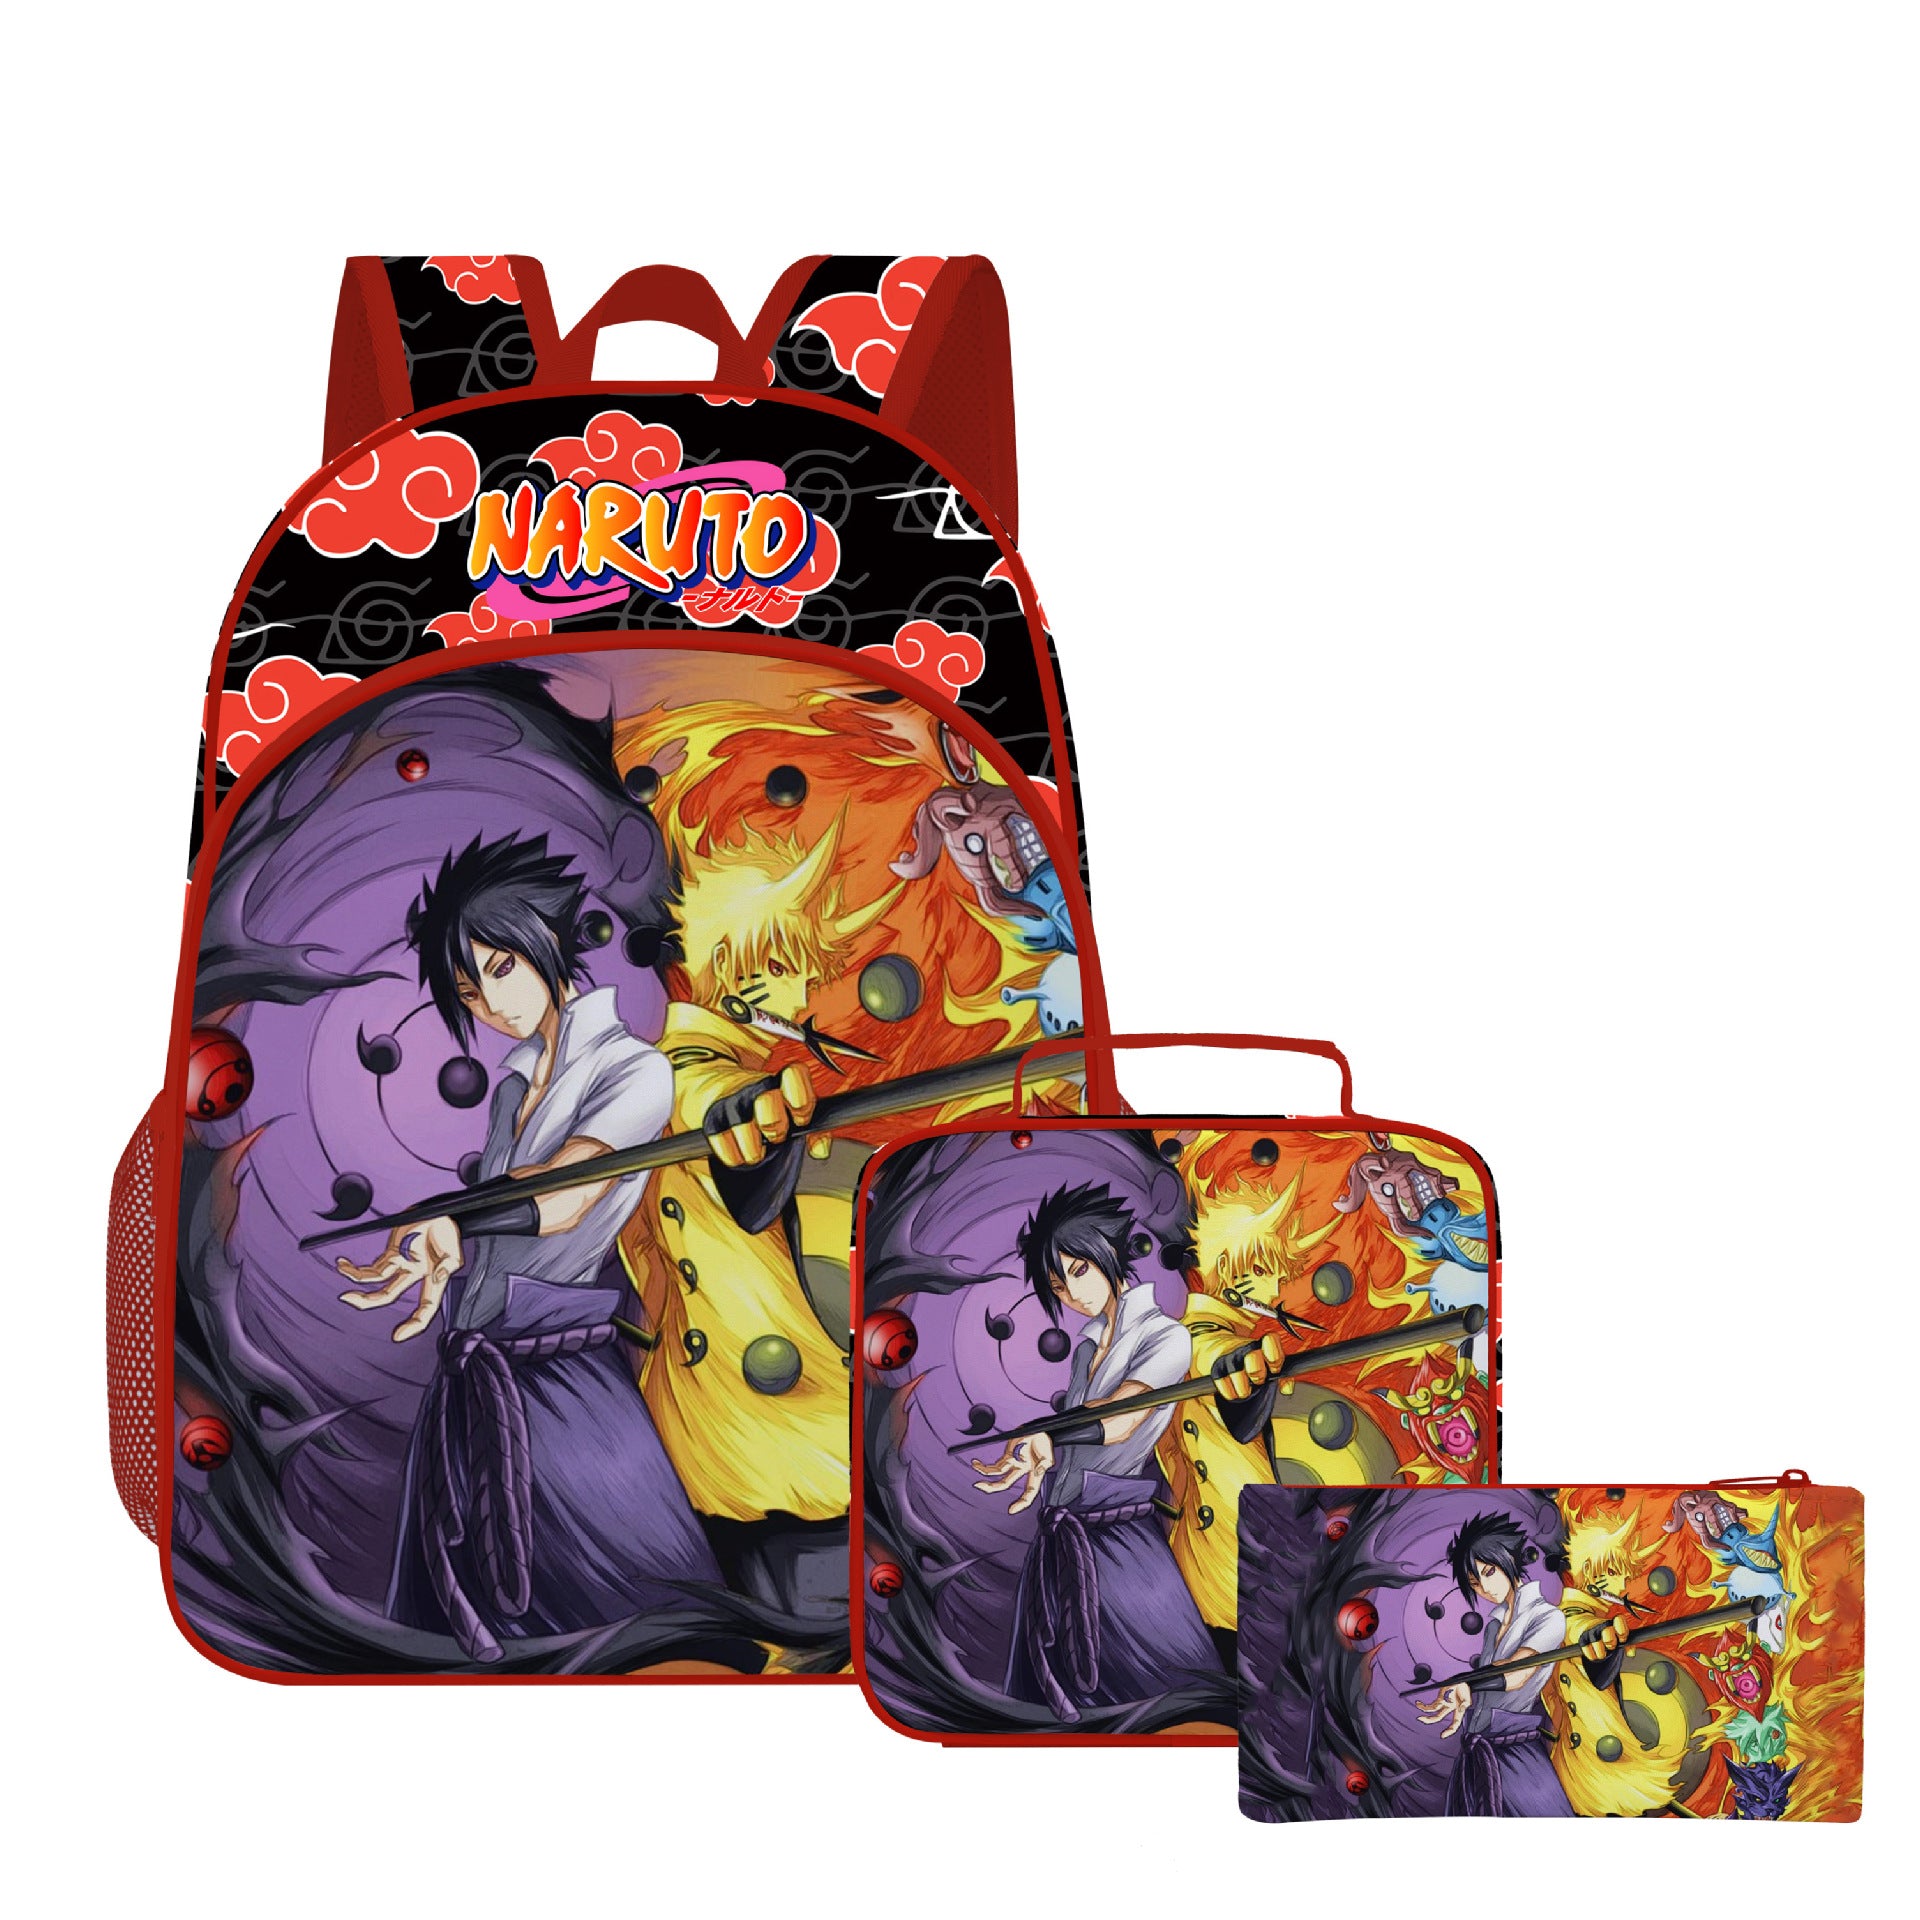 Primary Secondary School Kid Backpack Meal Kit Naruto School Bag 3 Pcs